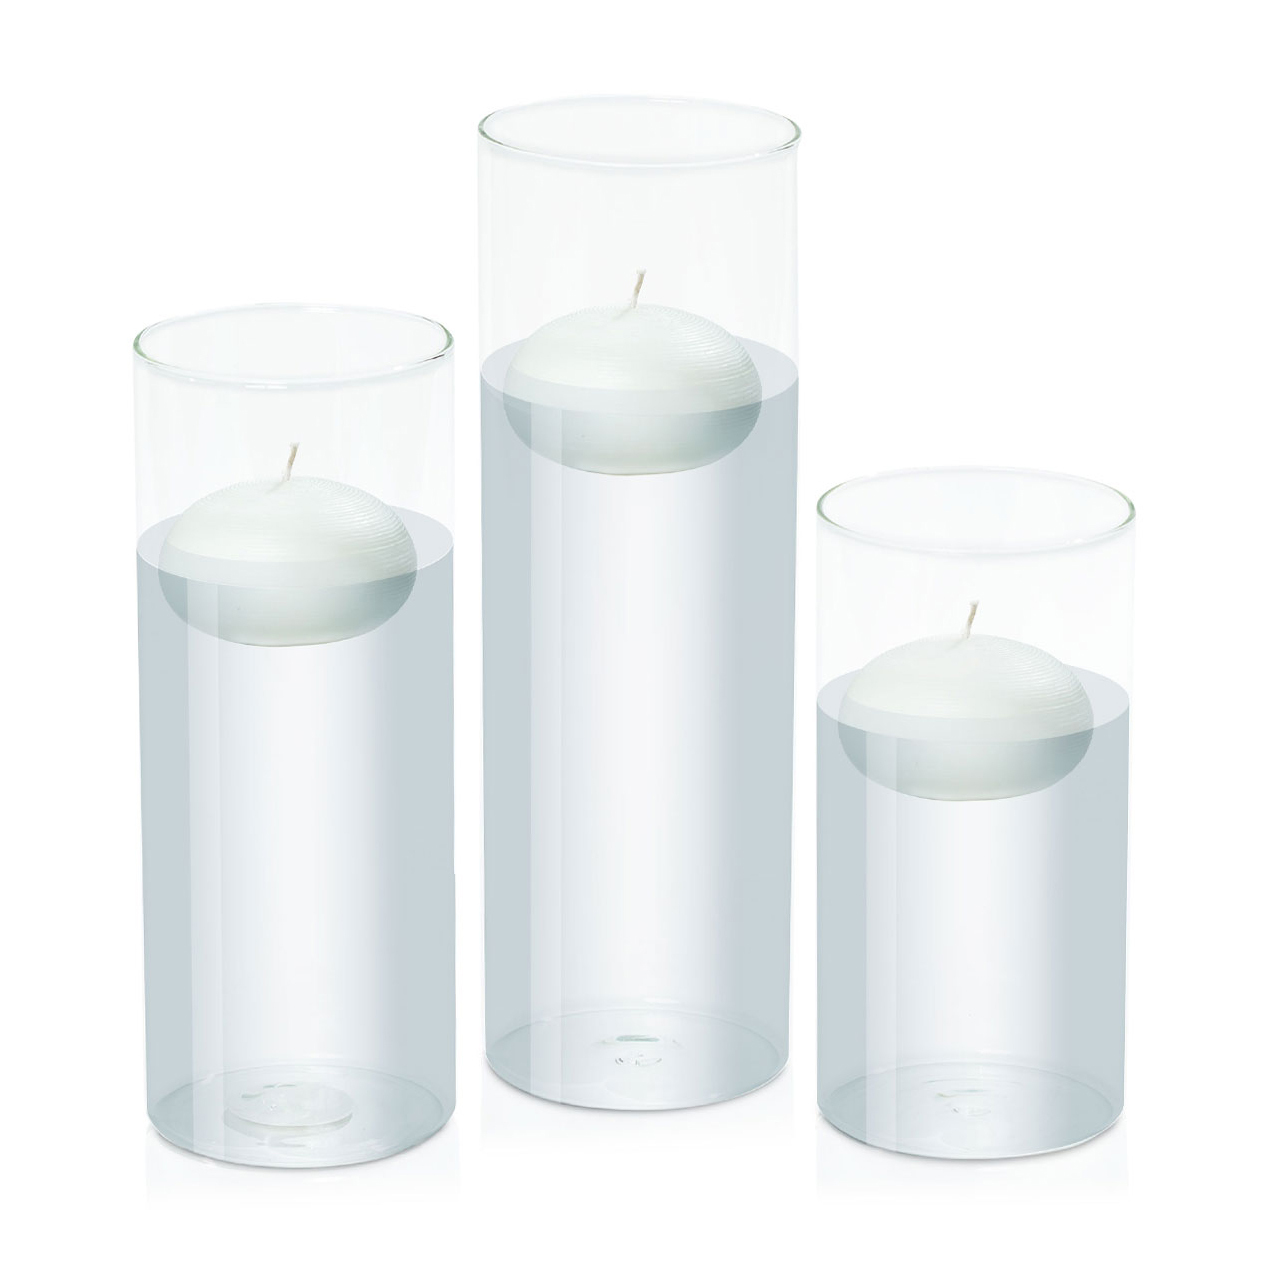 7.5cm Floating Candle in 10cm Glass Set - Lg